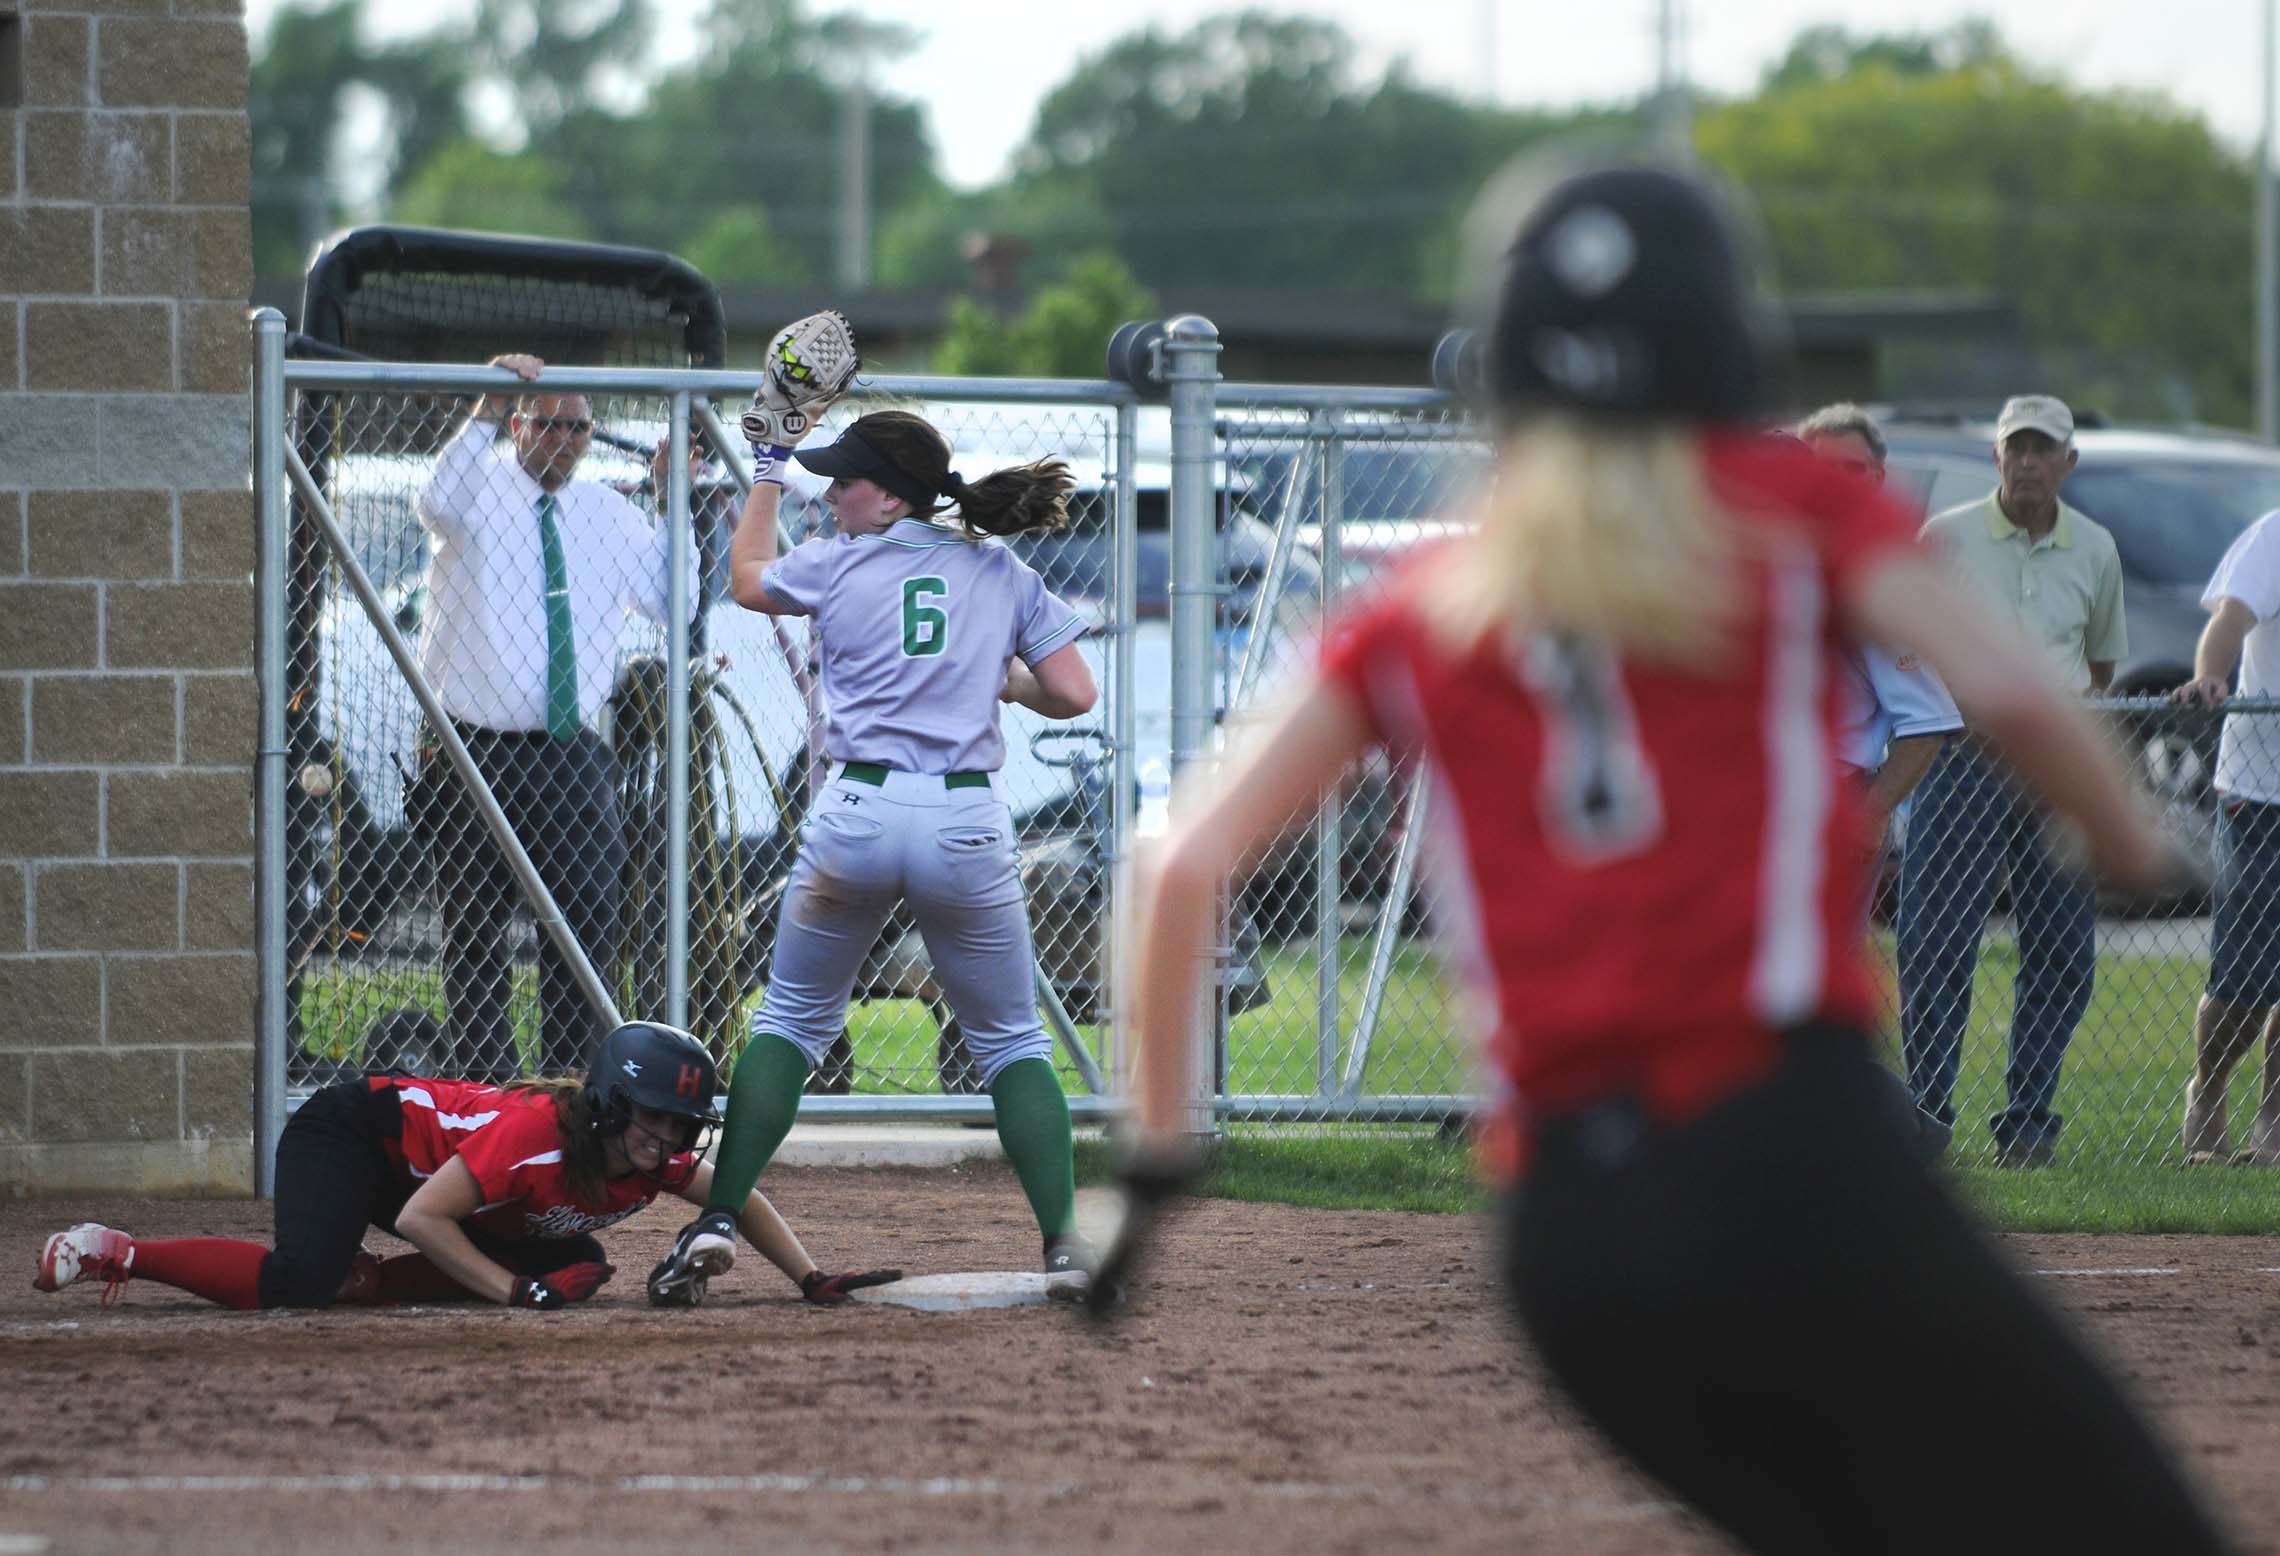  Dwight Township High School player Katy Edwards attempts to tag out a Hayworth player Tuesday during the Class 1A Sectional semifinal softball game at Dwight Township. 